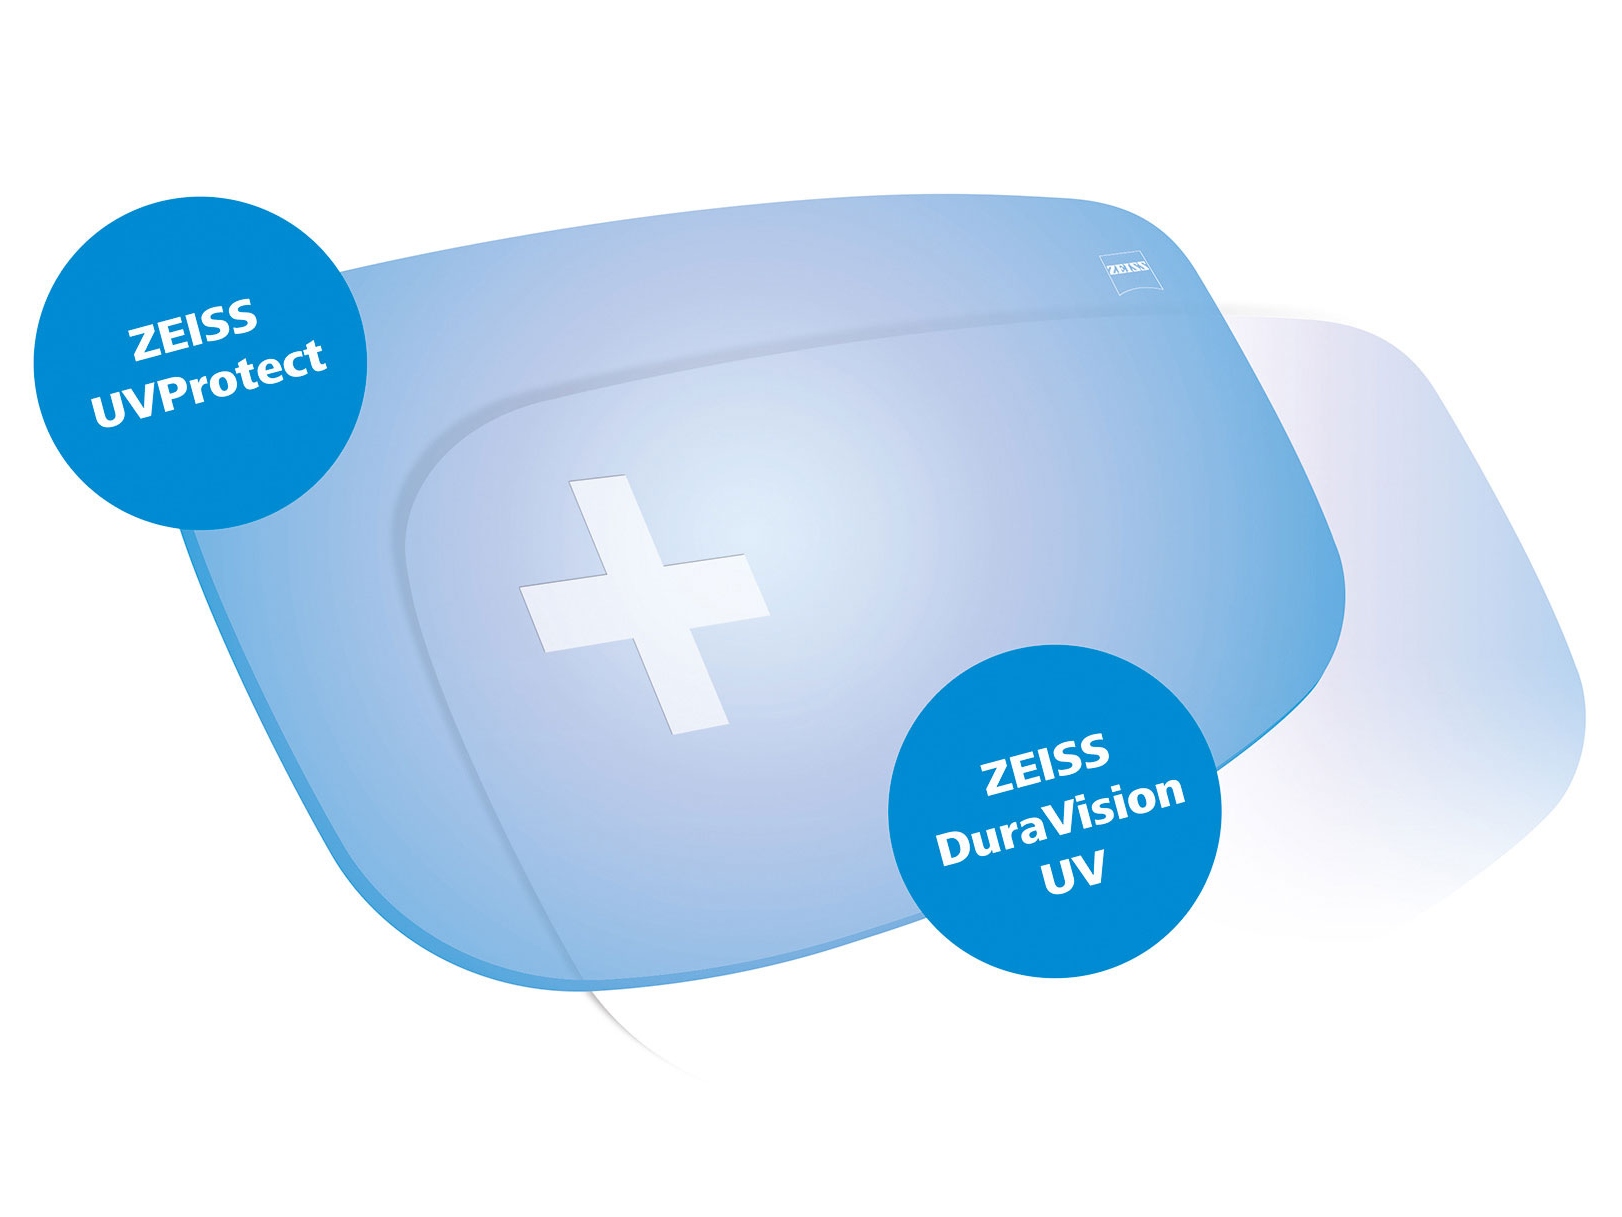 All ZEISS lenses come standard with UV protection from all sides. The graphic shows two solutions.